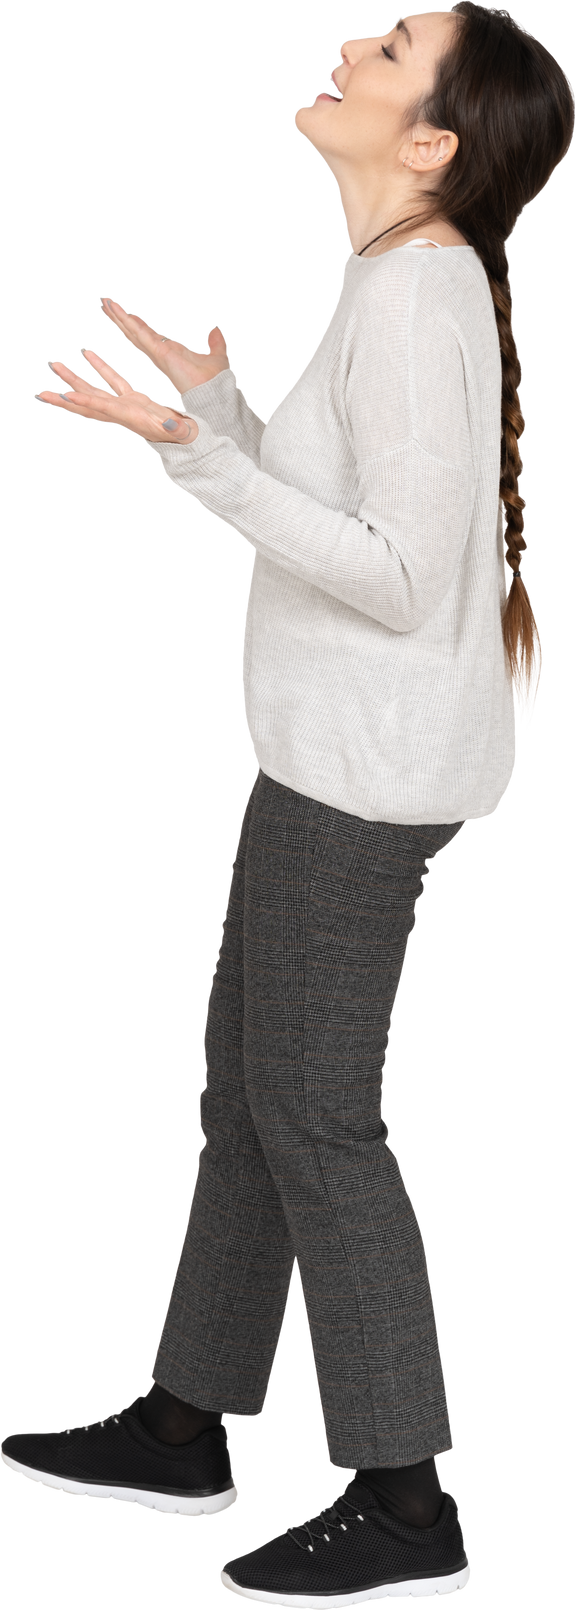 Woman Young Fit Laughing Free Transparent Image HQ PNG Image